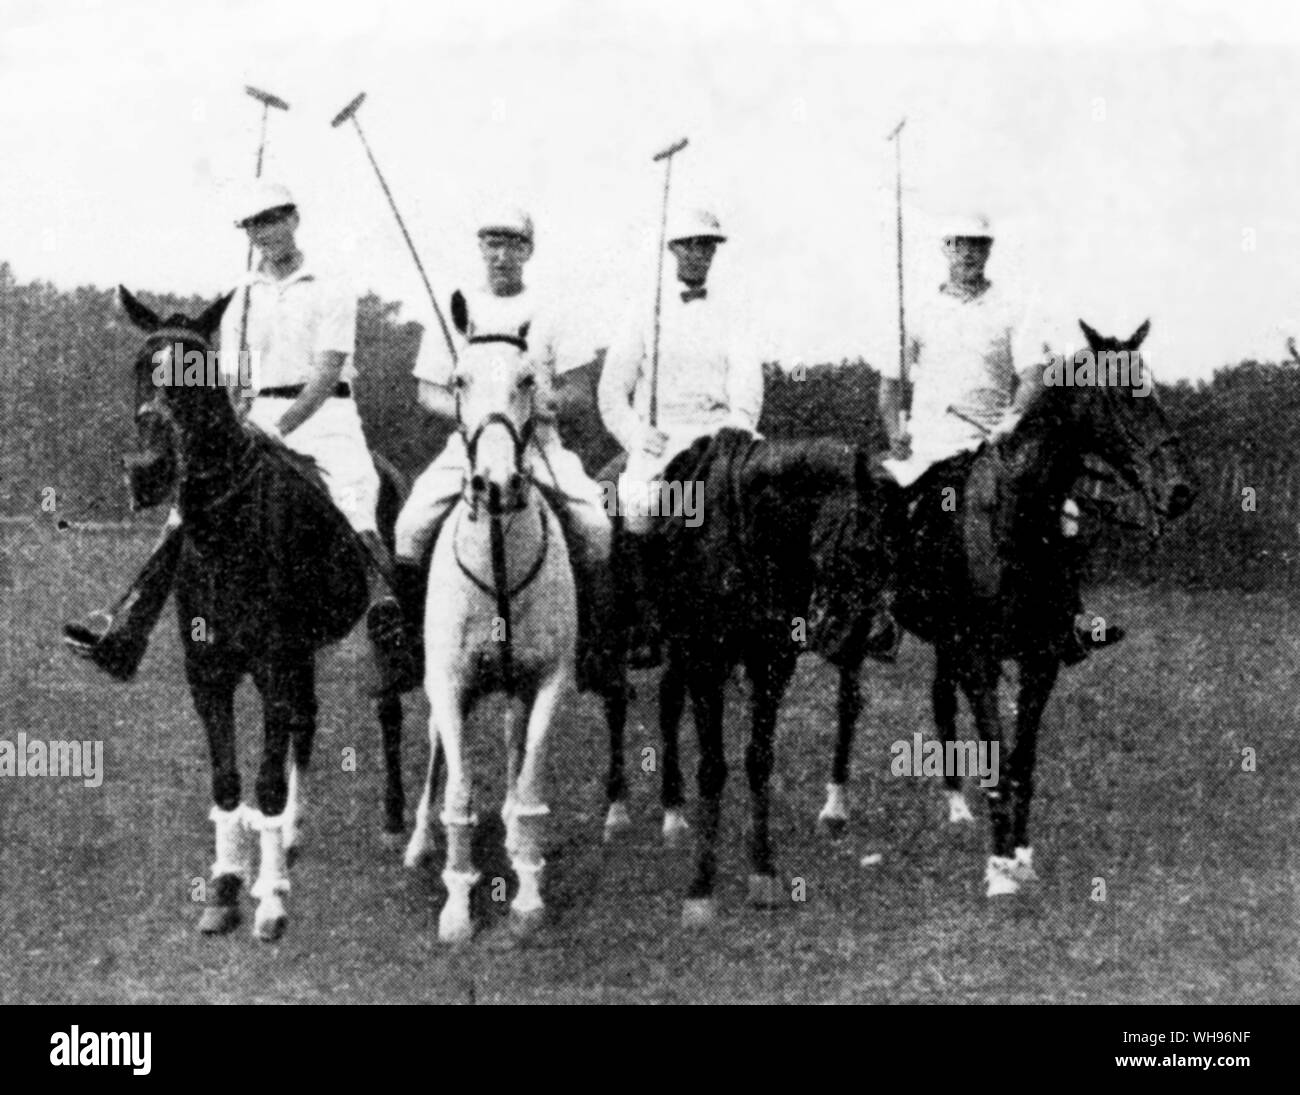 France, Paris Olympics, 1924: United States (USA) Polo Team came second on the Olympic competition. l-r: E. Boescke, T. Hitchcock (captain), F. Roe, R. Wanamaker. Stock Photo